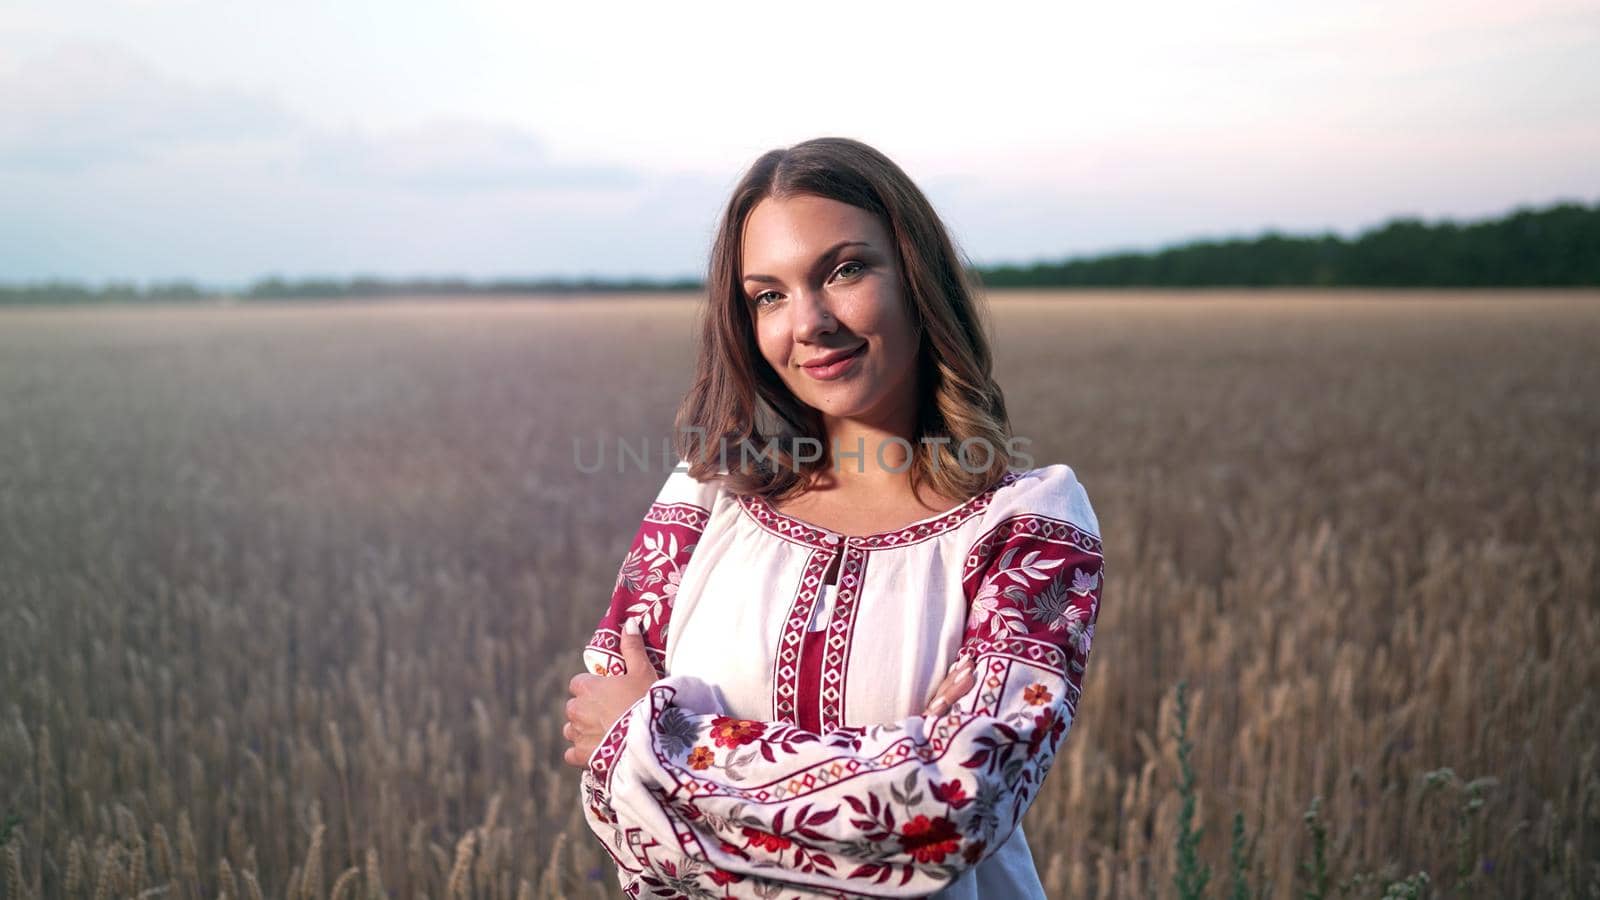 Smiling ukrainian woman in yellow ripe wheat field. Young lady in traditional embroidery vyshyvanka. Ukraine, independence, freedom, patriot symbol, victory in war. by kristina_kokhanova